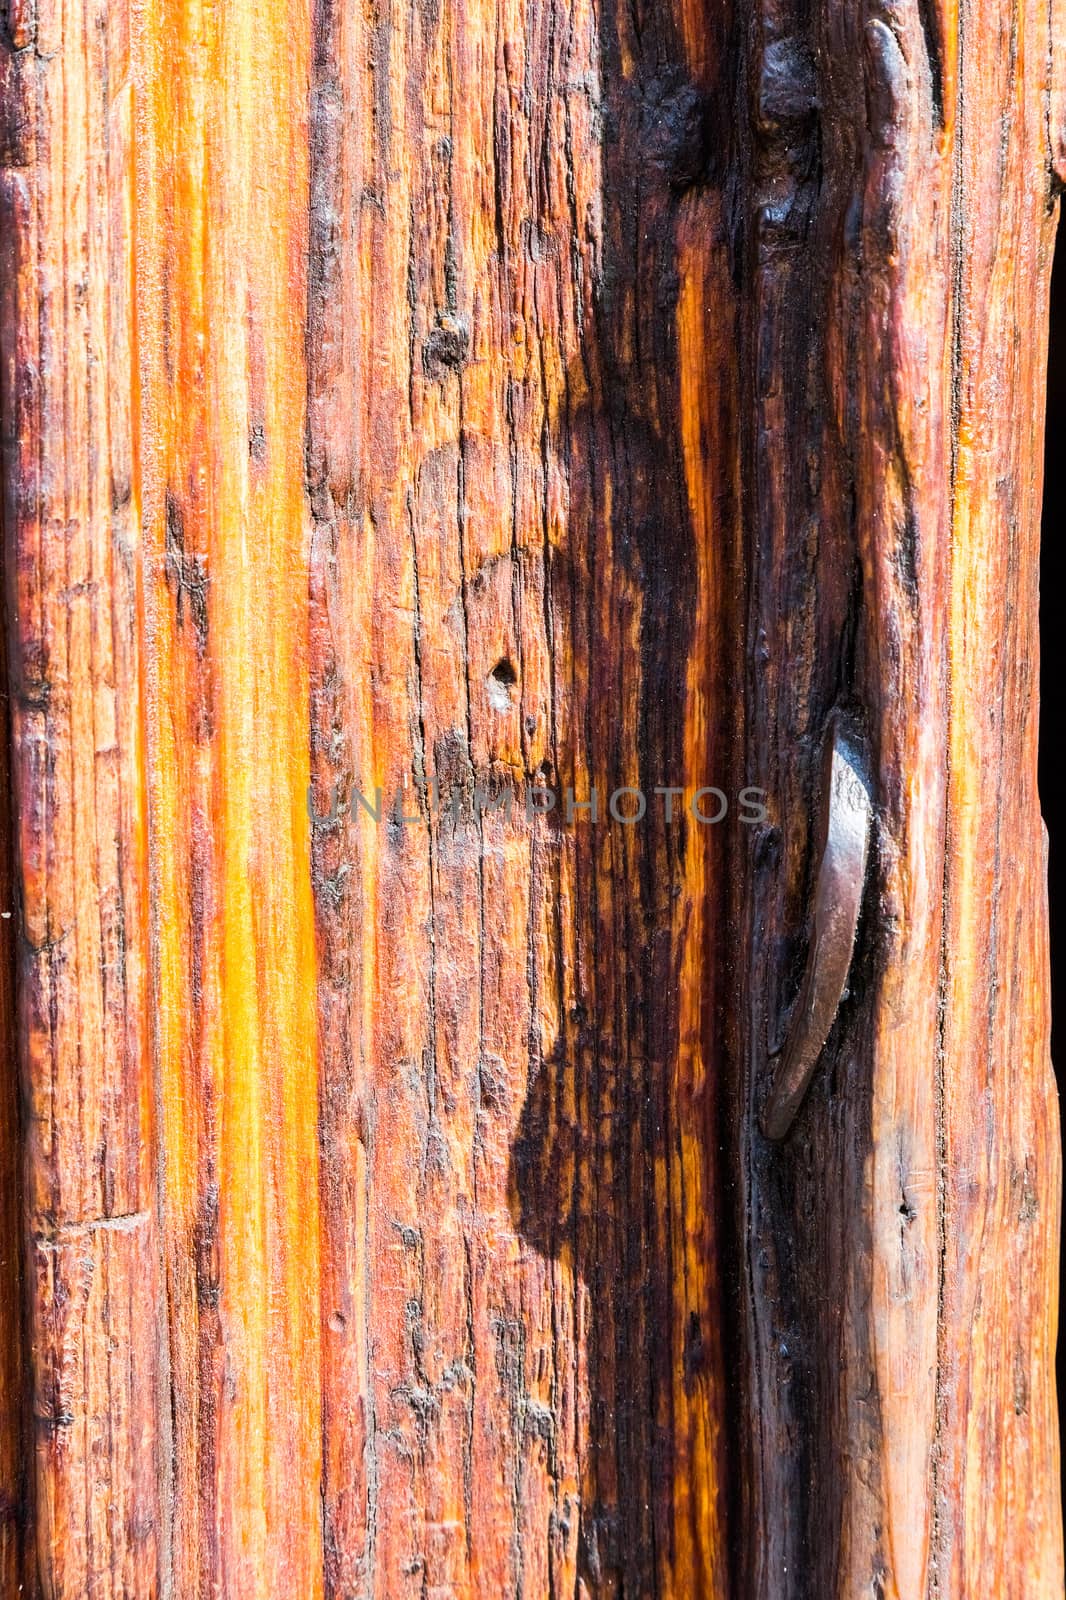 Old wood texture by hanusst